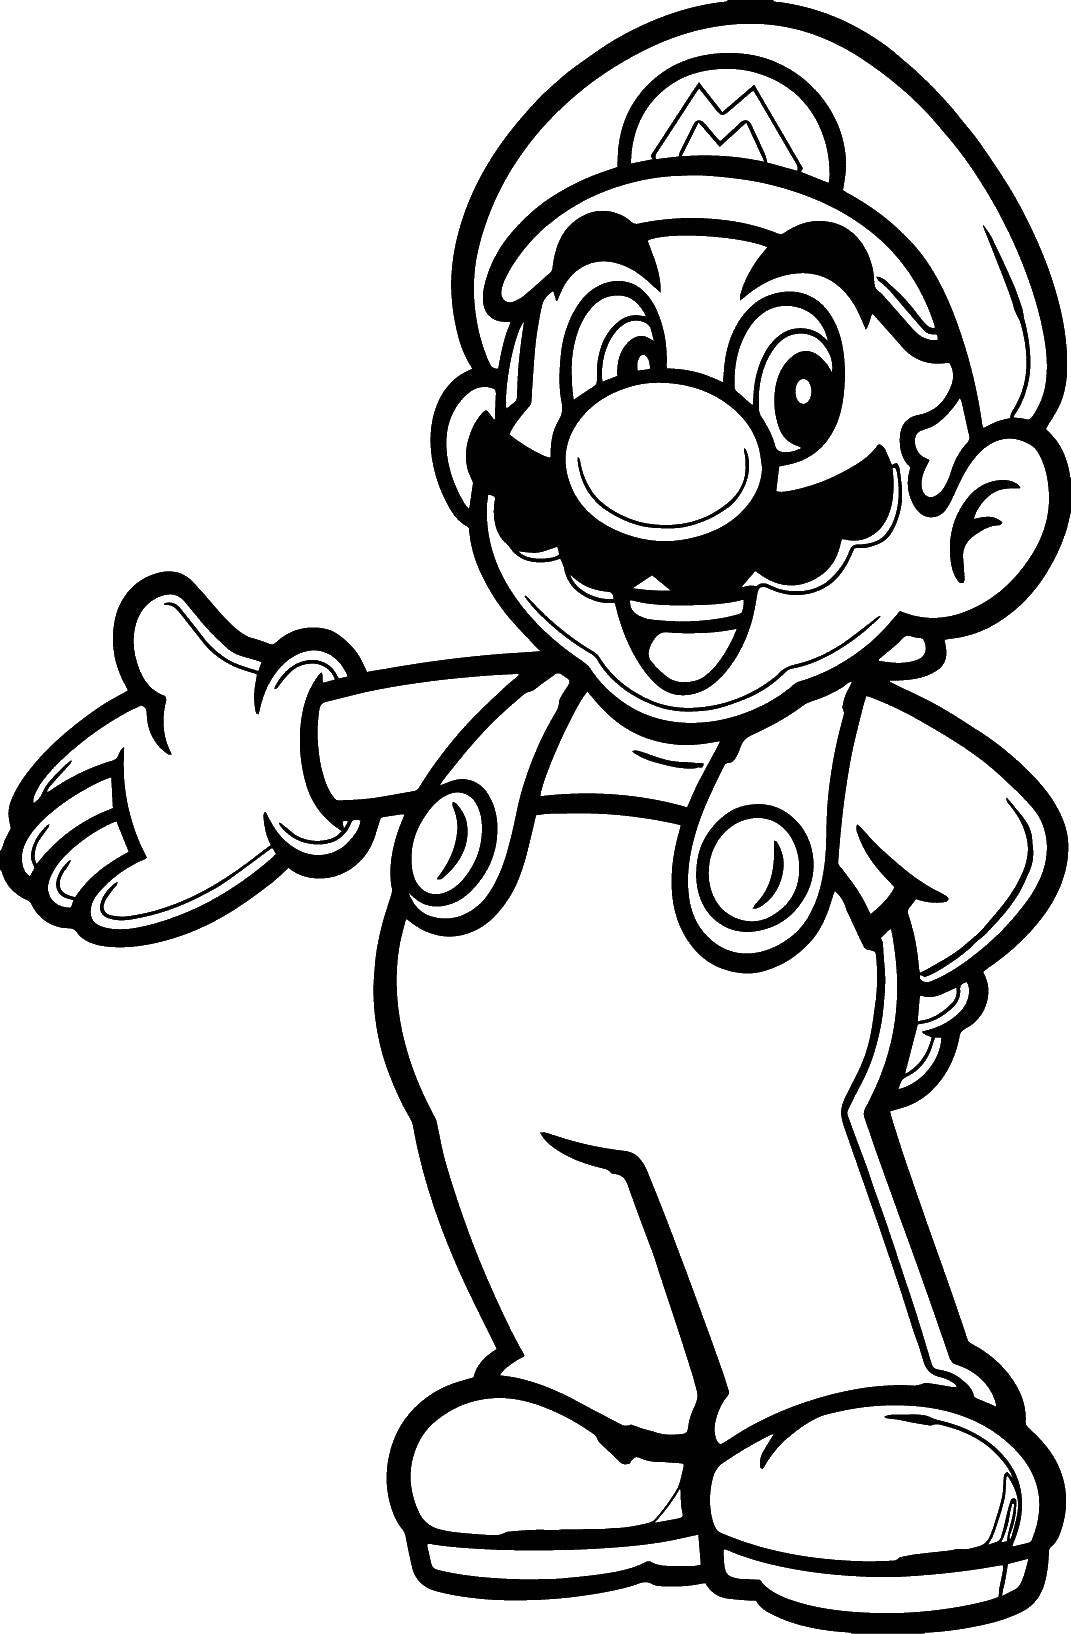 Coloring The character of the game, Mario. Category games. Tags:  Games, Mario.